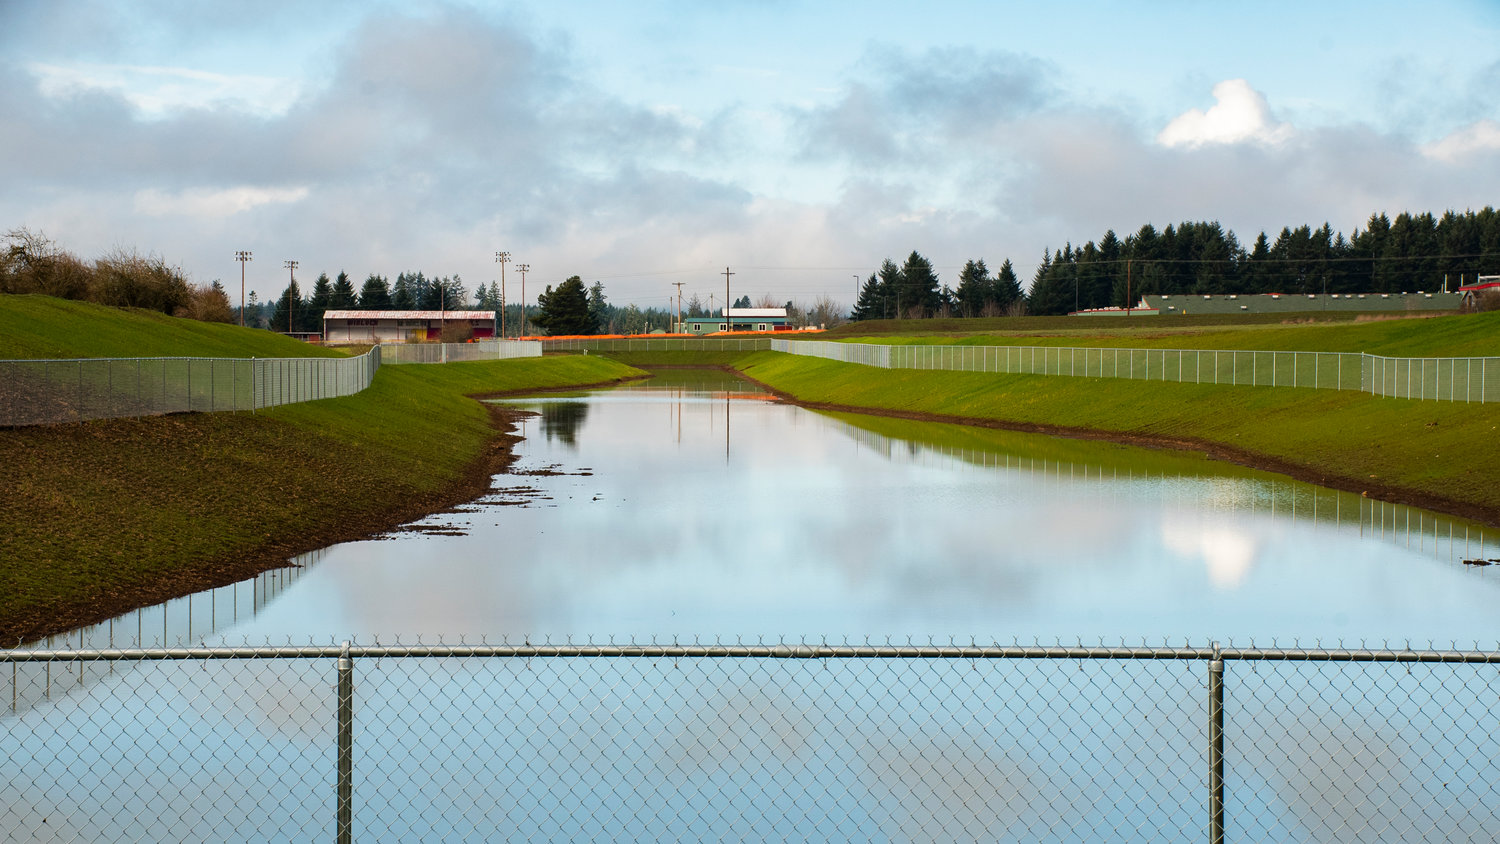 The Winlock High School football stadium sets the backdrop for a water retention pond in Winlock off Mickelsen Parkway.